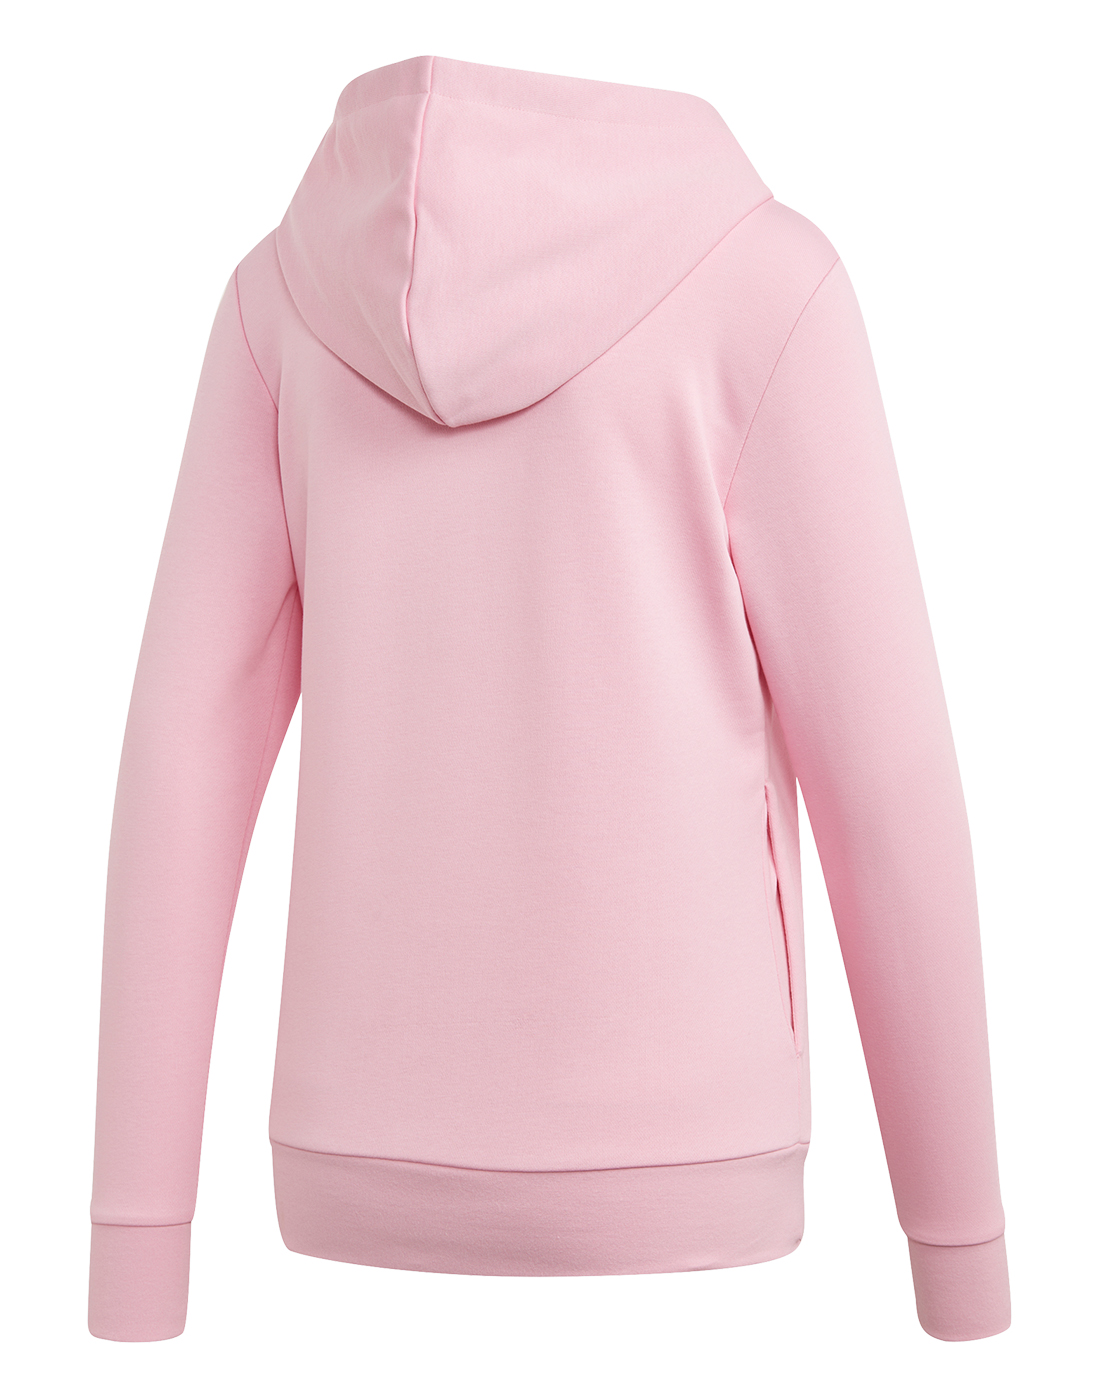 Women's Pink adidas Hoodie | Life Style Sports